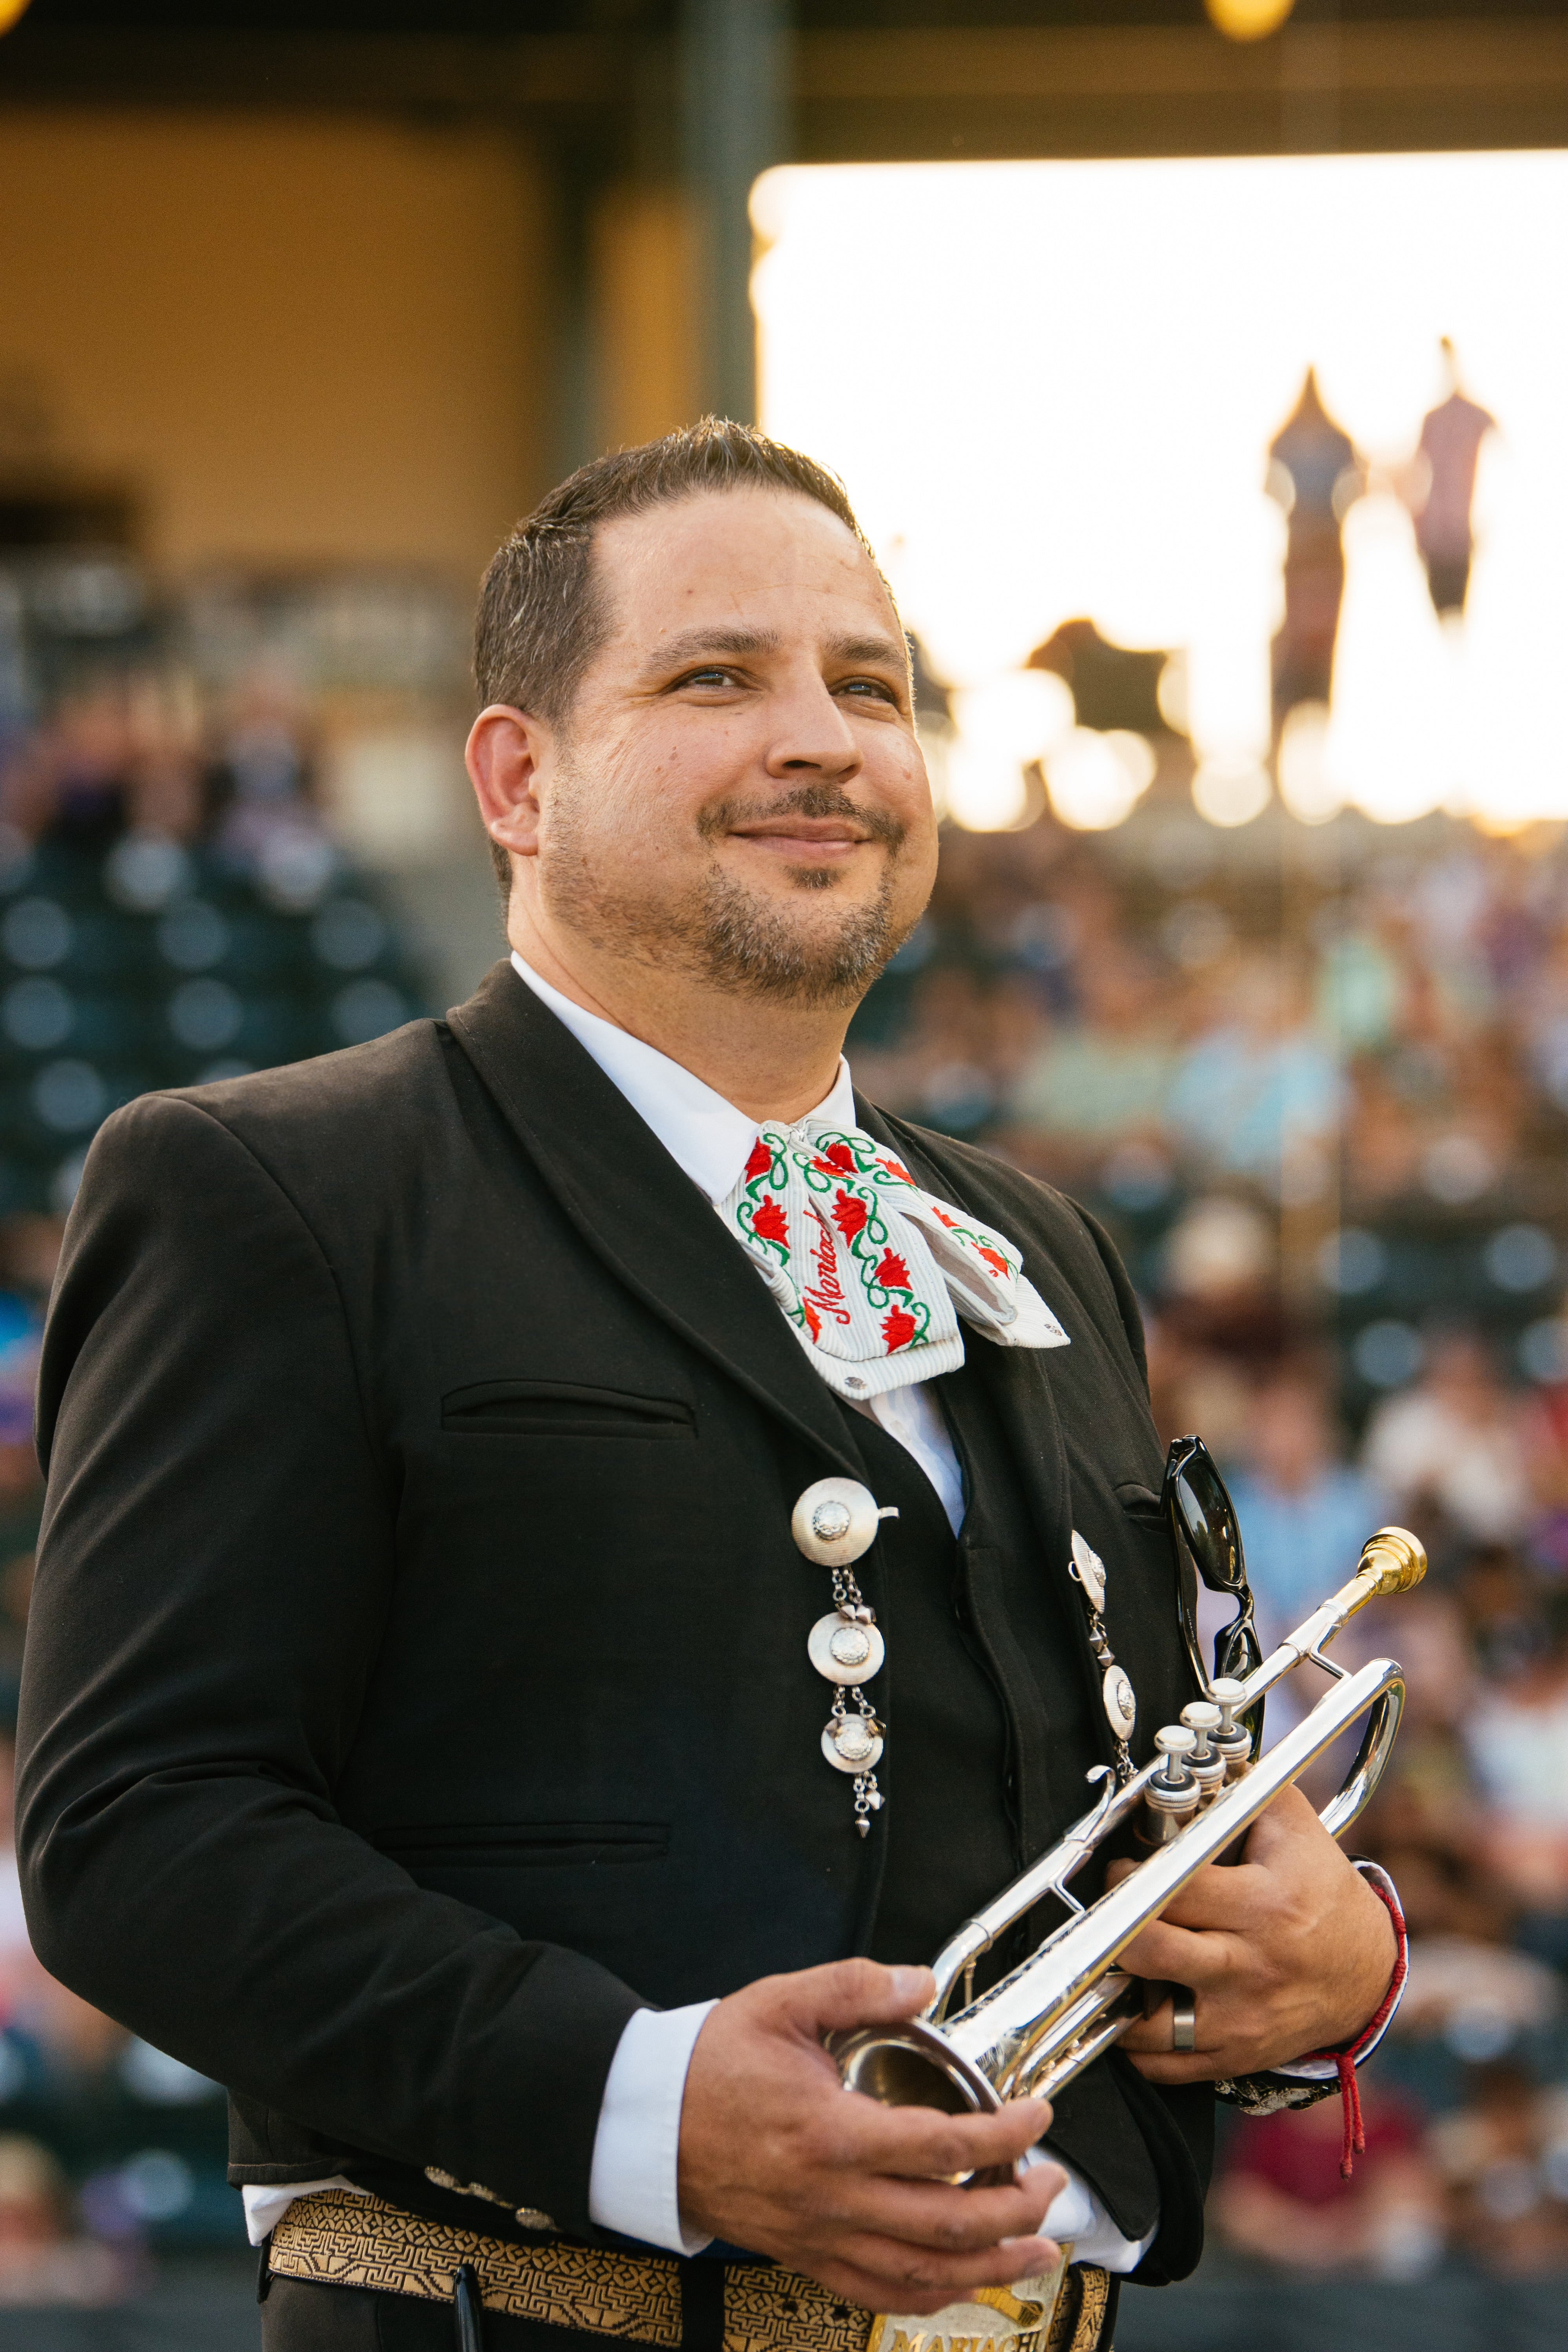 Arturo stands posing in a stadium, with his trumpet and wearing traditional mariachi regalia.